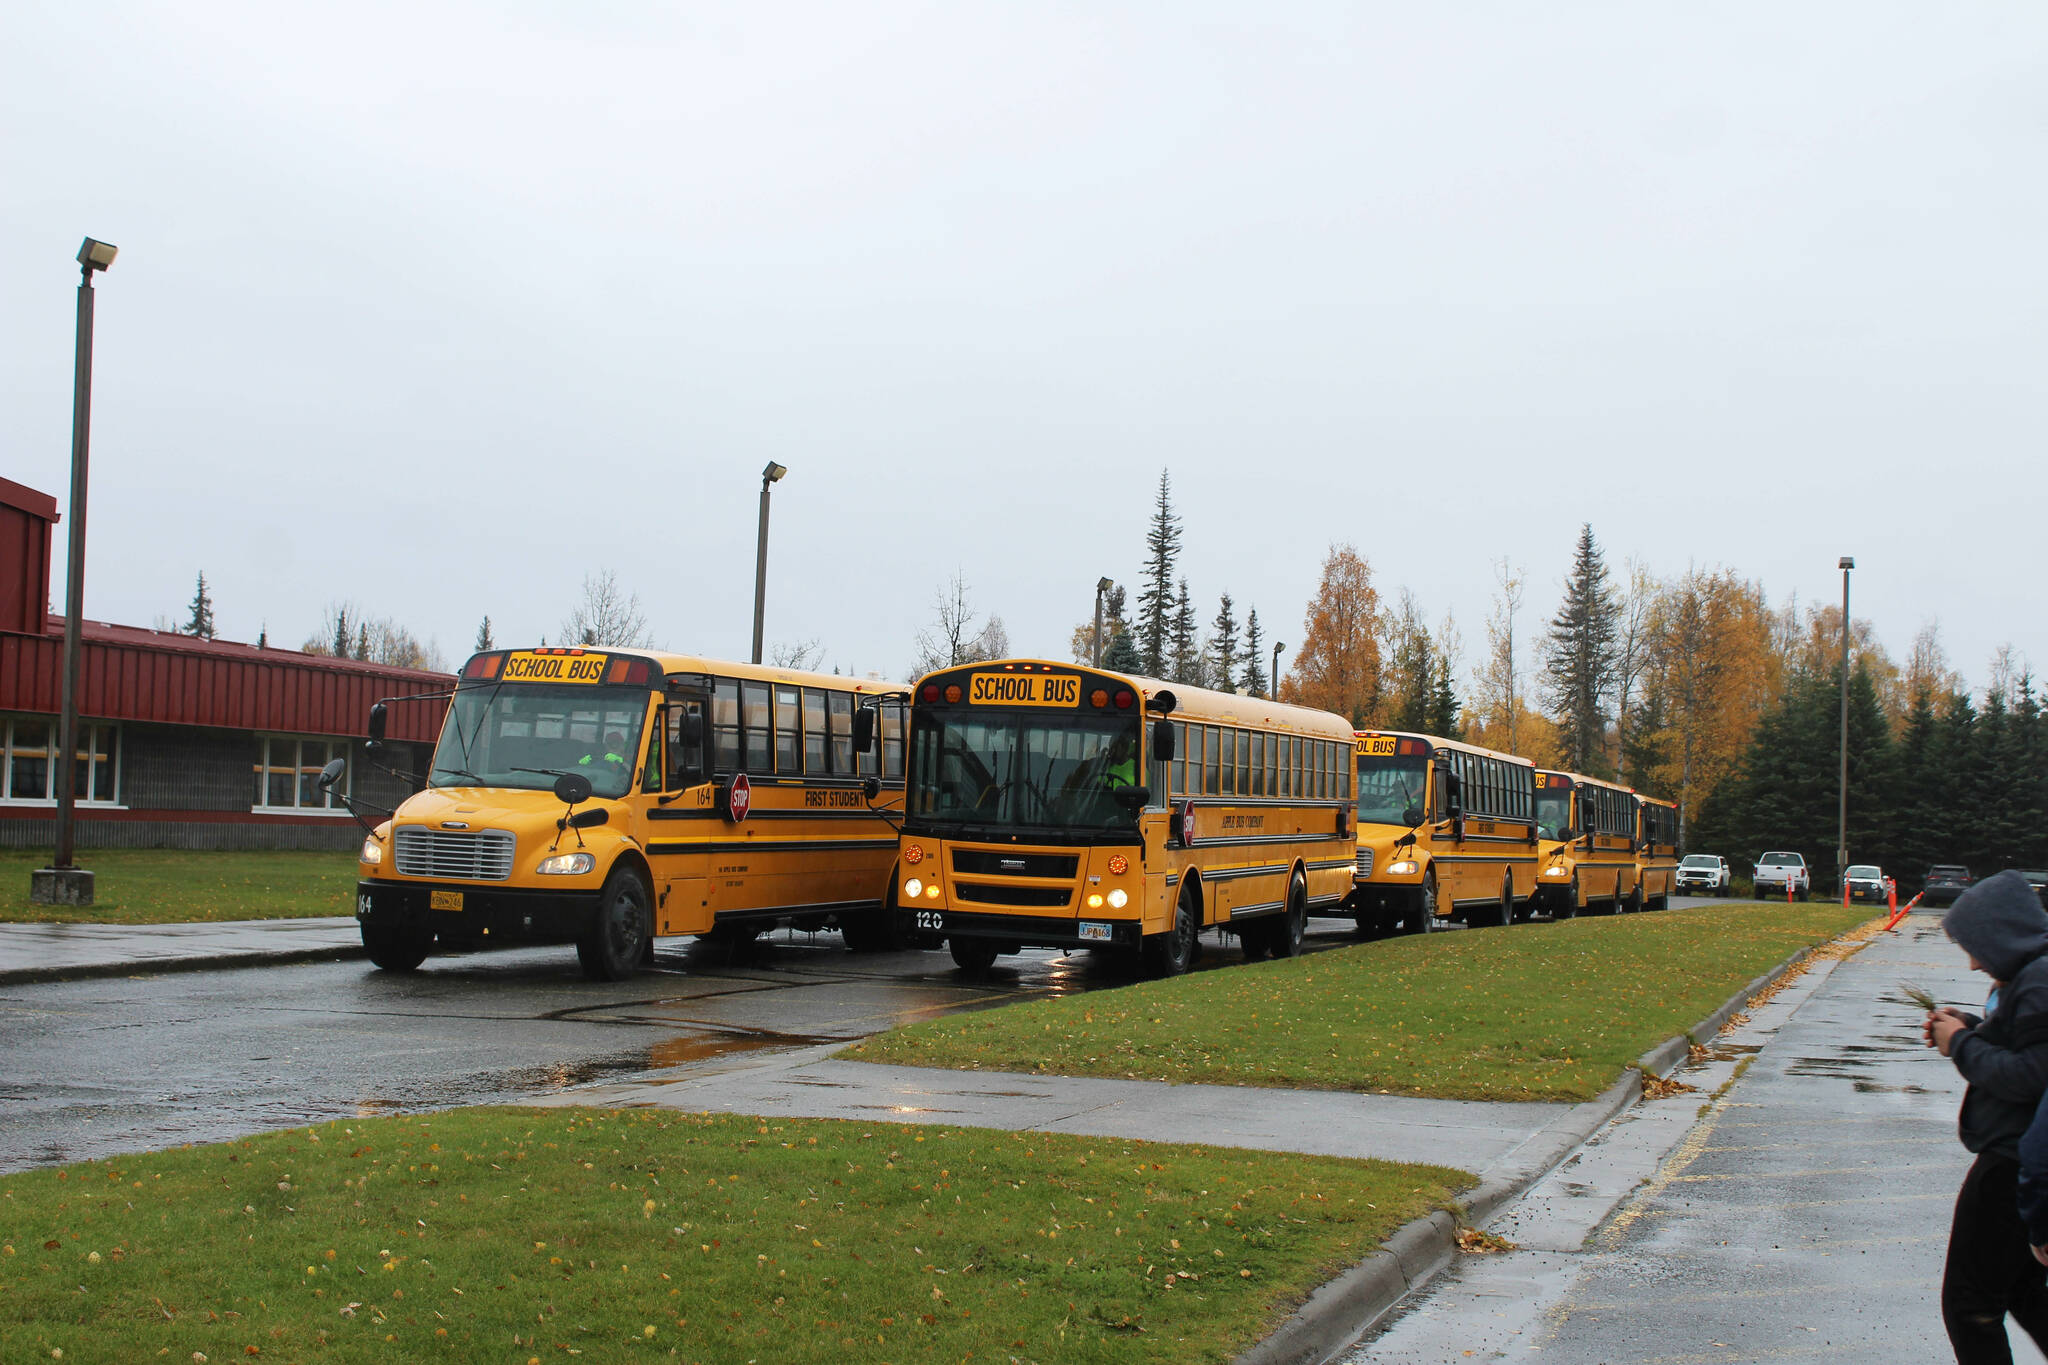 Buses line up ahead of dismissal at Mountain View Elementary School on Thursday, September 29, 2022, in Kenai, Alaska. A bond package up for consideration by Kenai Peninsula Borough voters on Oct. 4 would fund improvements to the school’s traffic flow. (Ashlyn O’Hara/Peninsula Clarion)